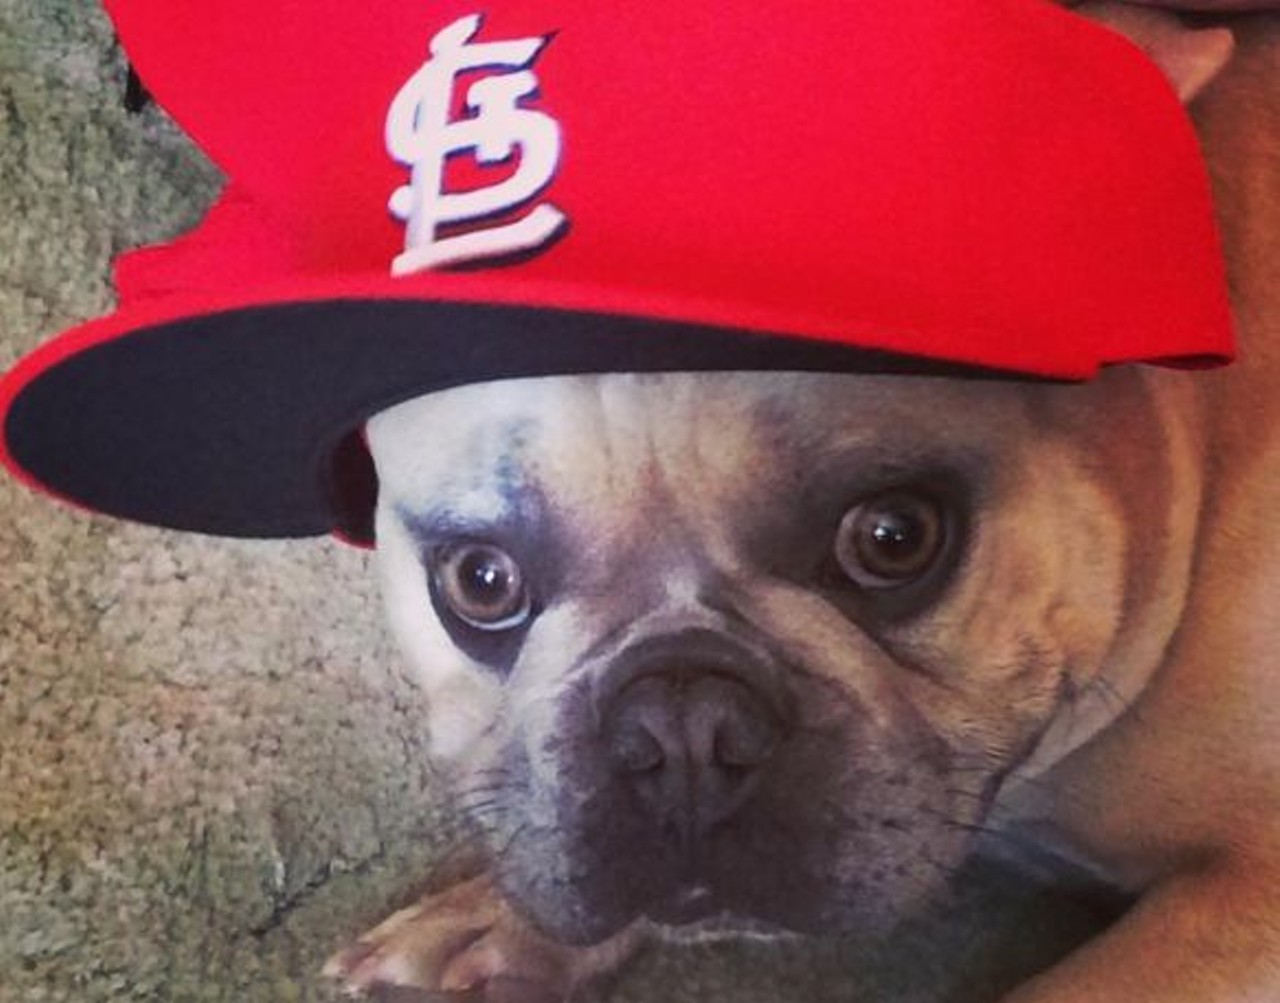 Yes, this dog's name is Yadi Gold. Wouldn't it be great if all dogs had a Cardinals reference in their name? Photo courtesy of Instagram / yadigold_frenchie.